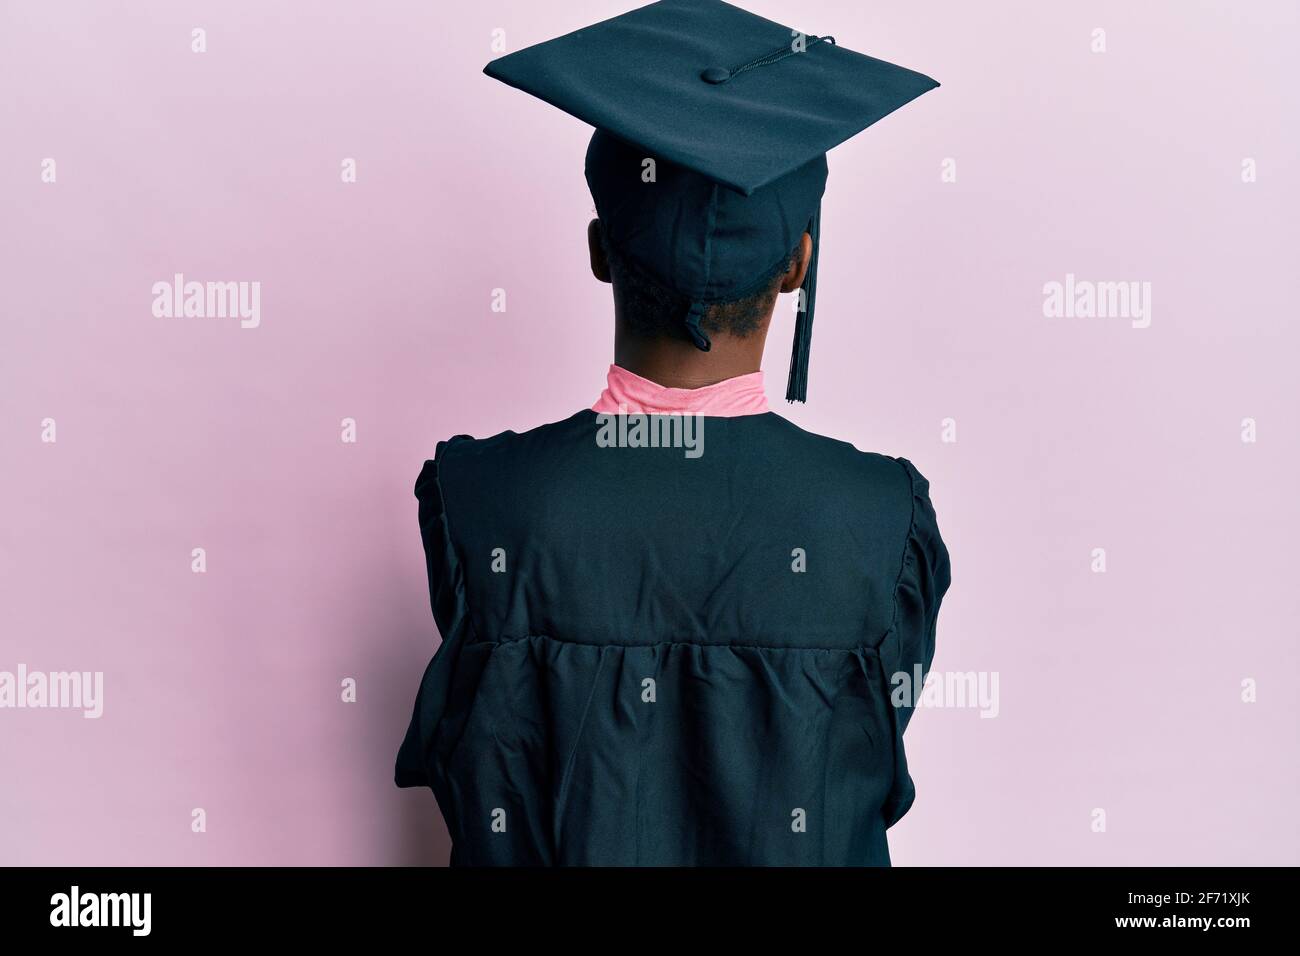 Young african american girl wearing graduation cap and ceremony robe standing backwards looking away with crossed arms Stock Photo